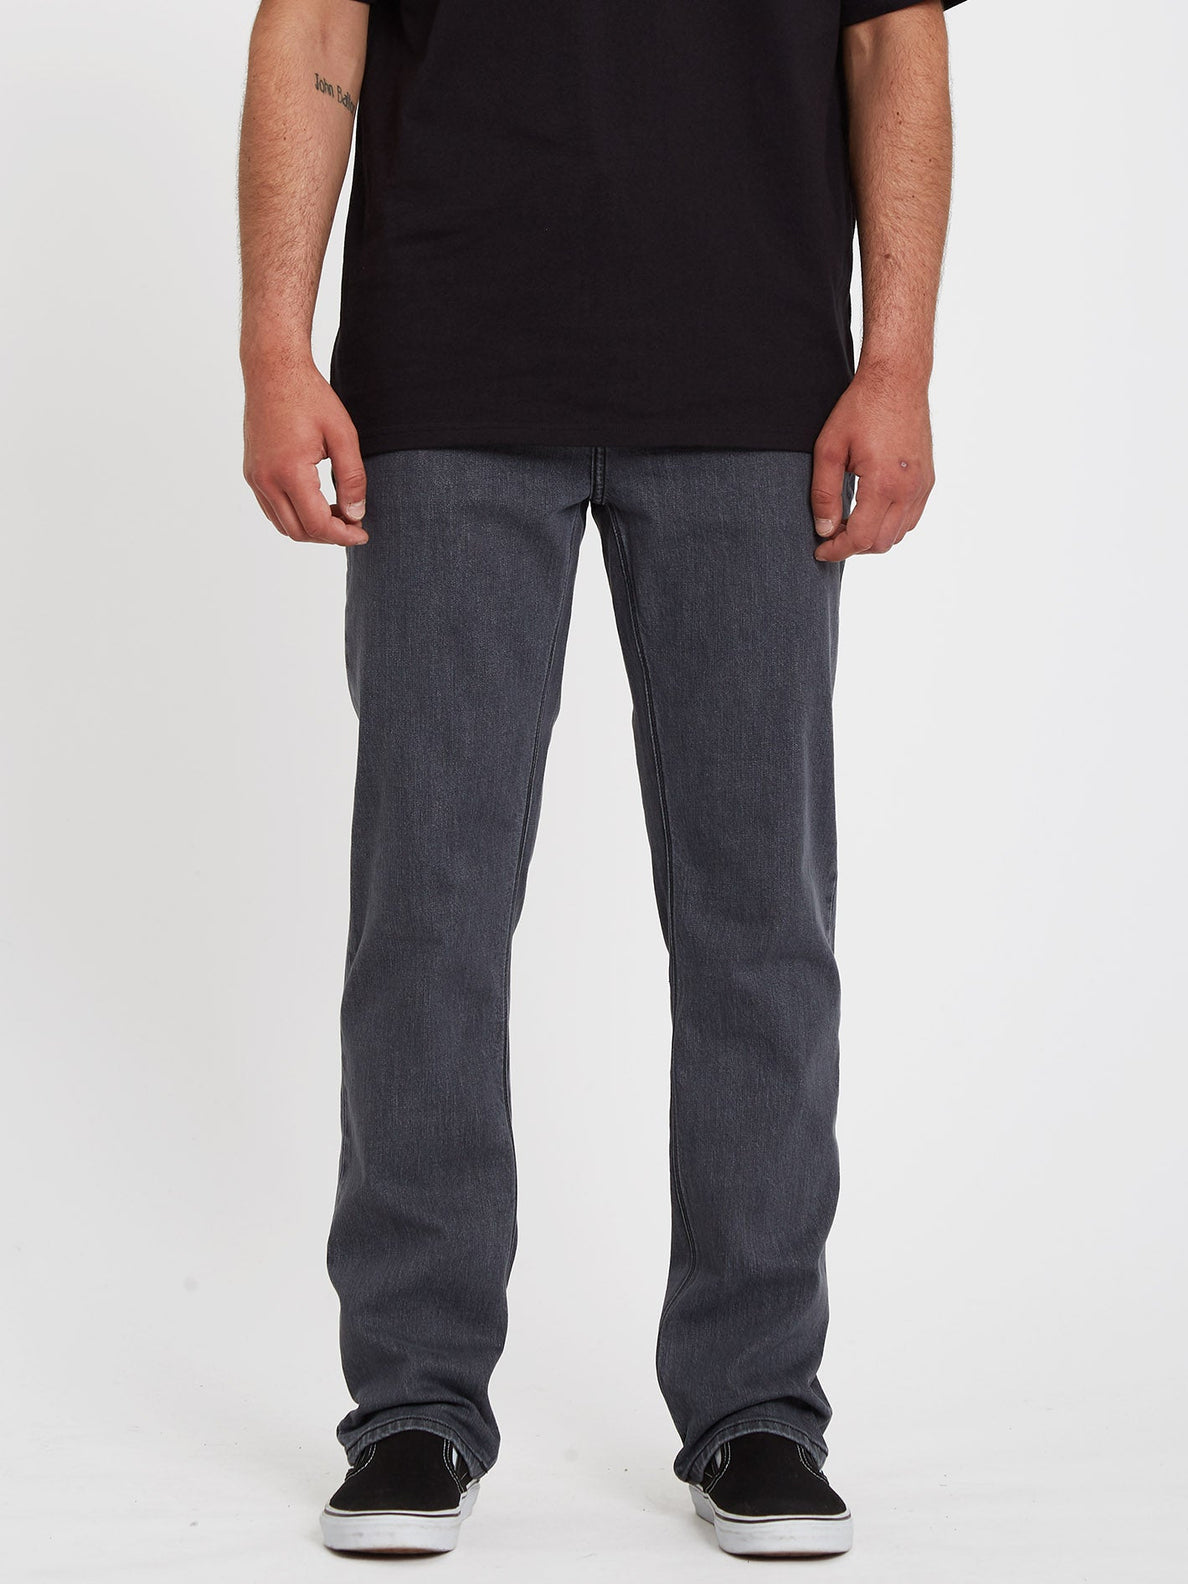 Solver Jeans - EASY ENZYME GREY (A1912303_EEG) [F]